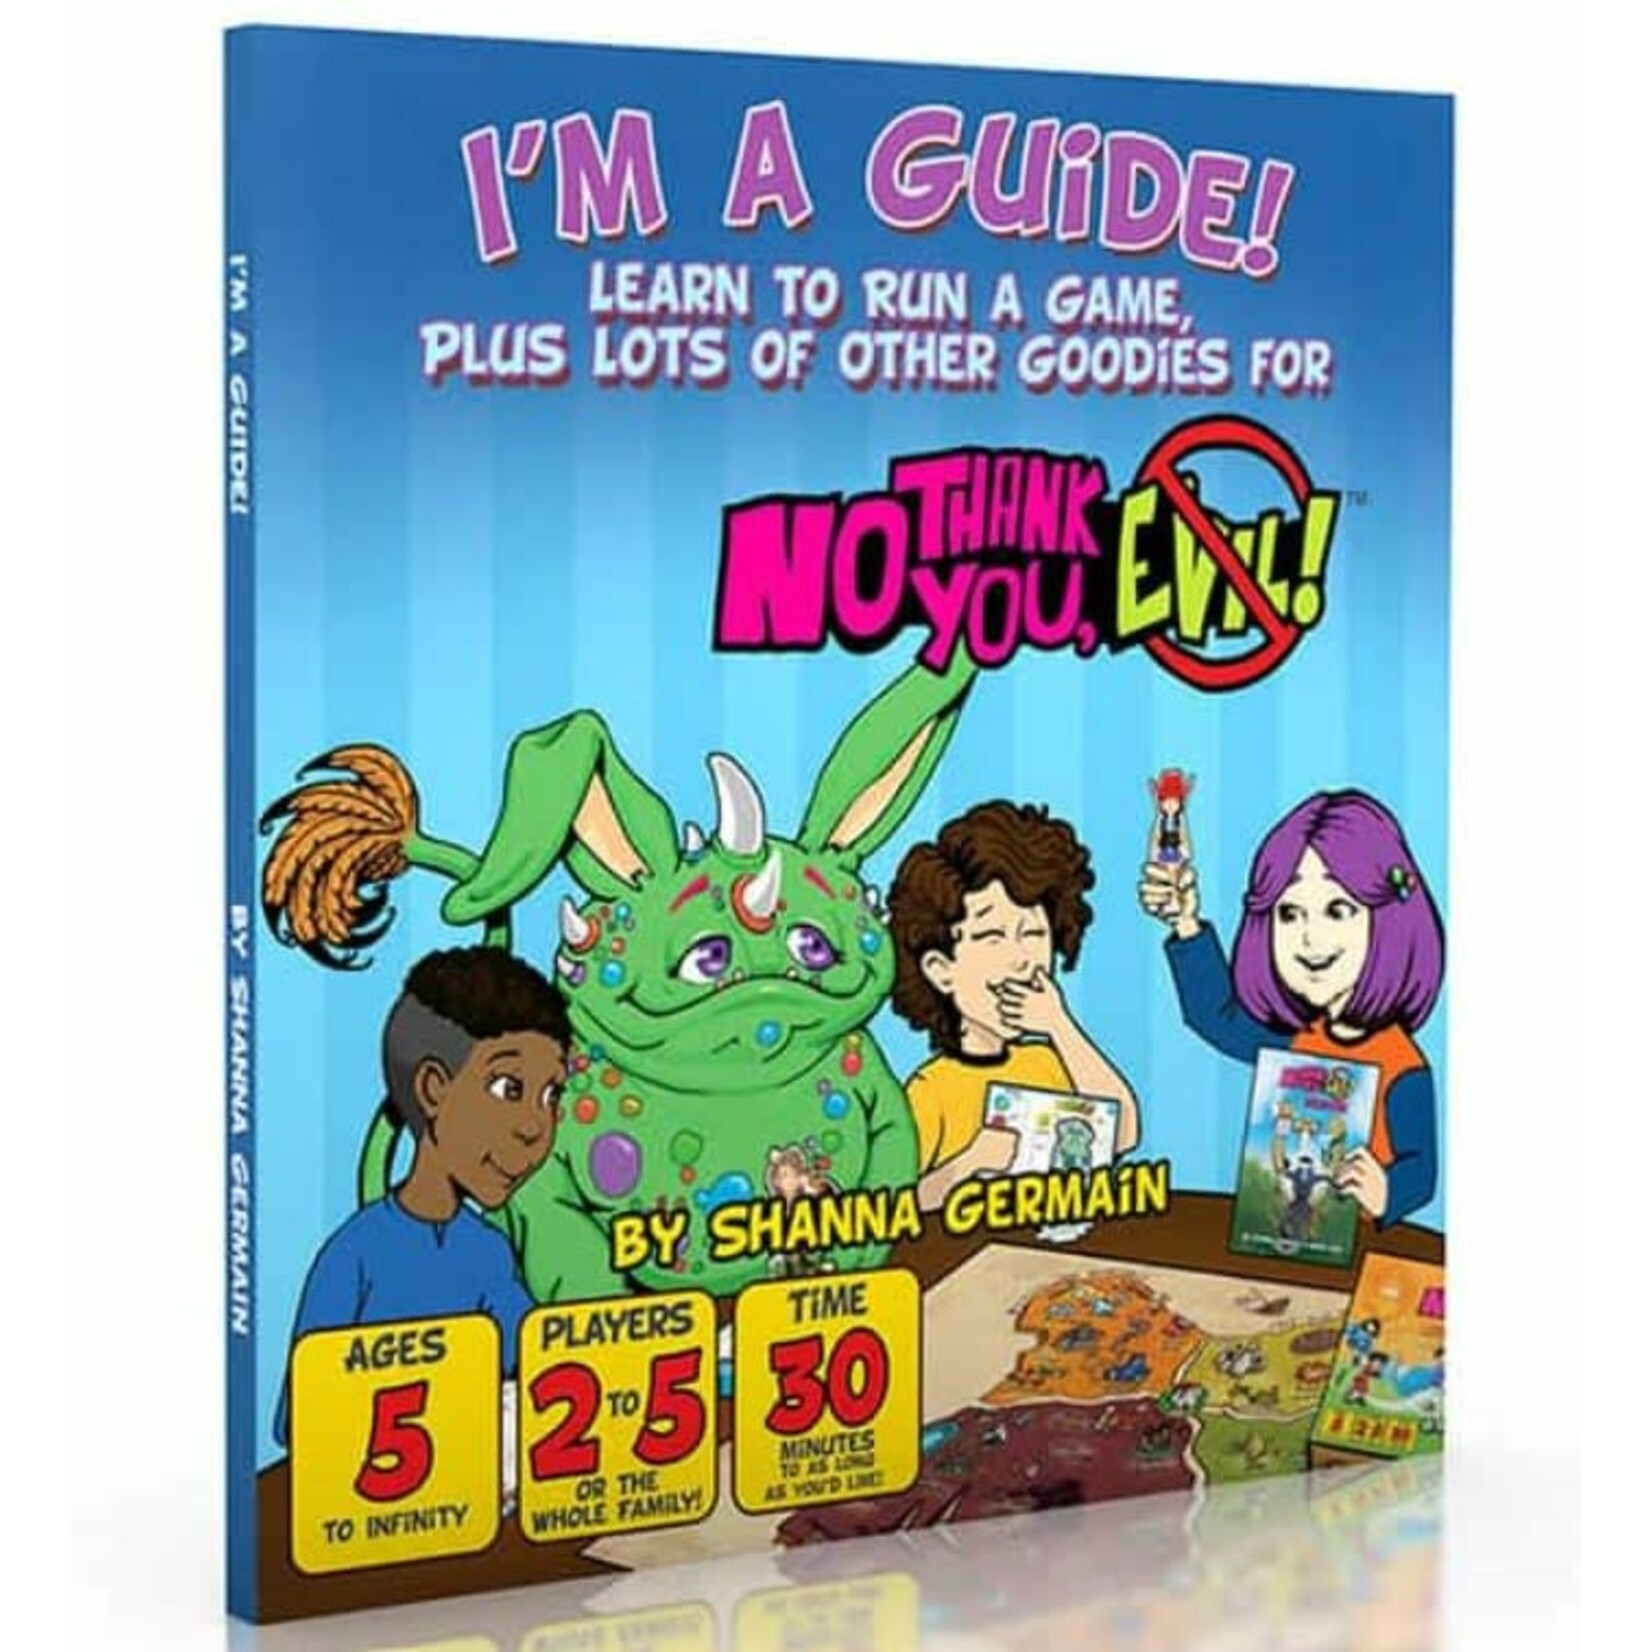 Monte Cook Games LLC No Thank You, Evil!: I'm a Guide